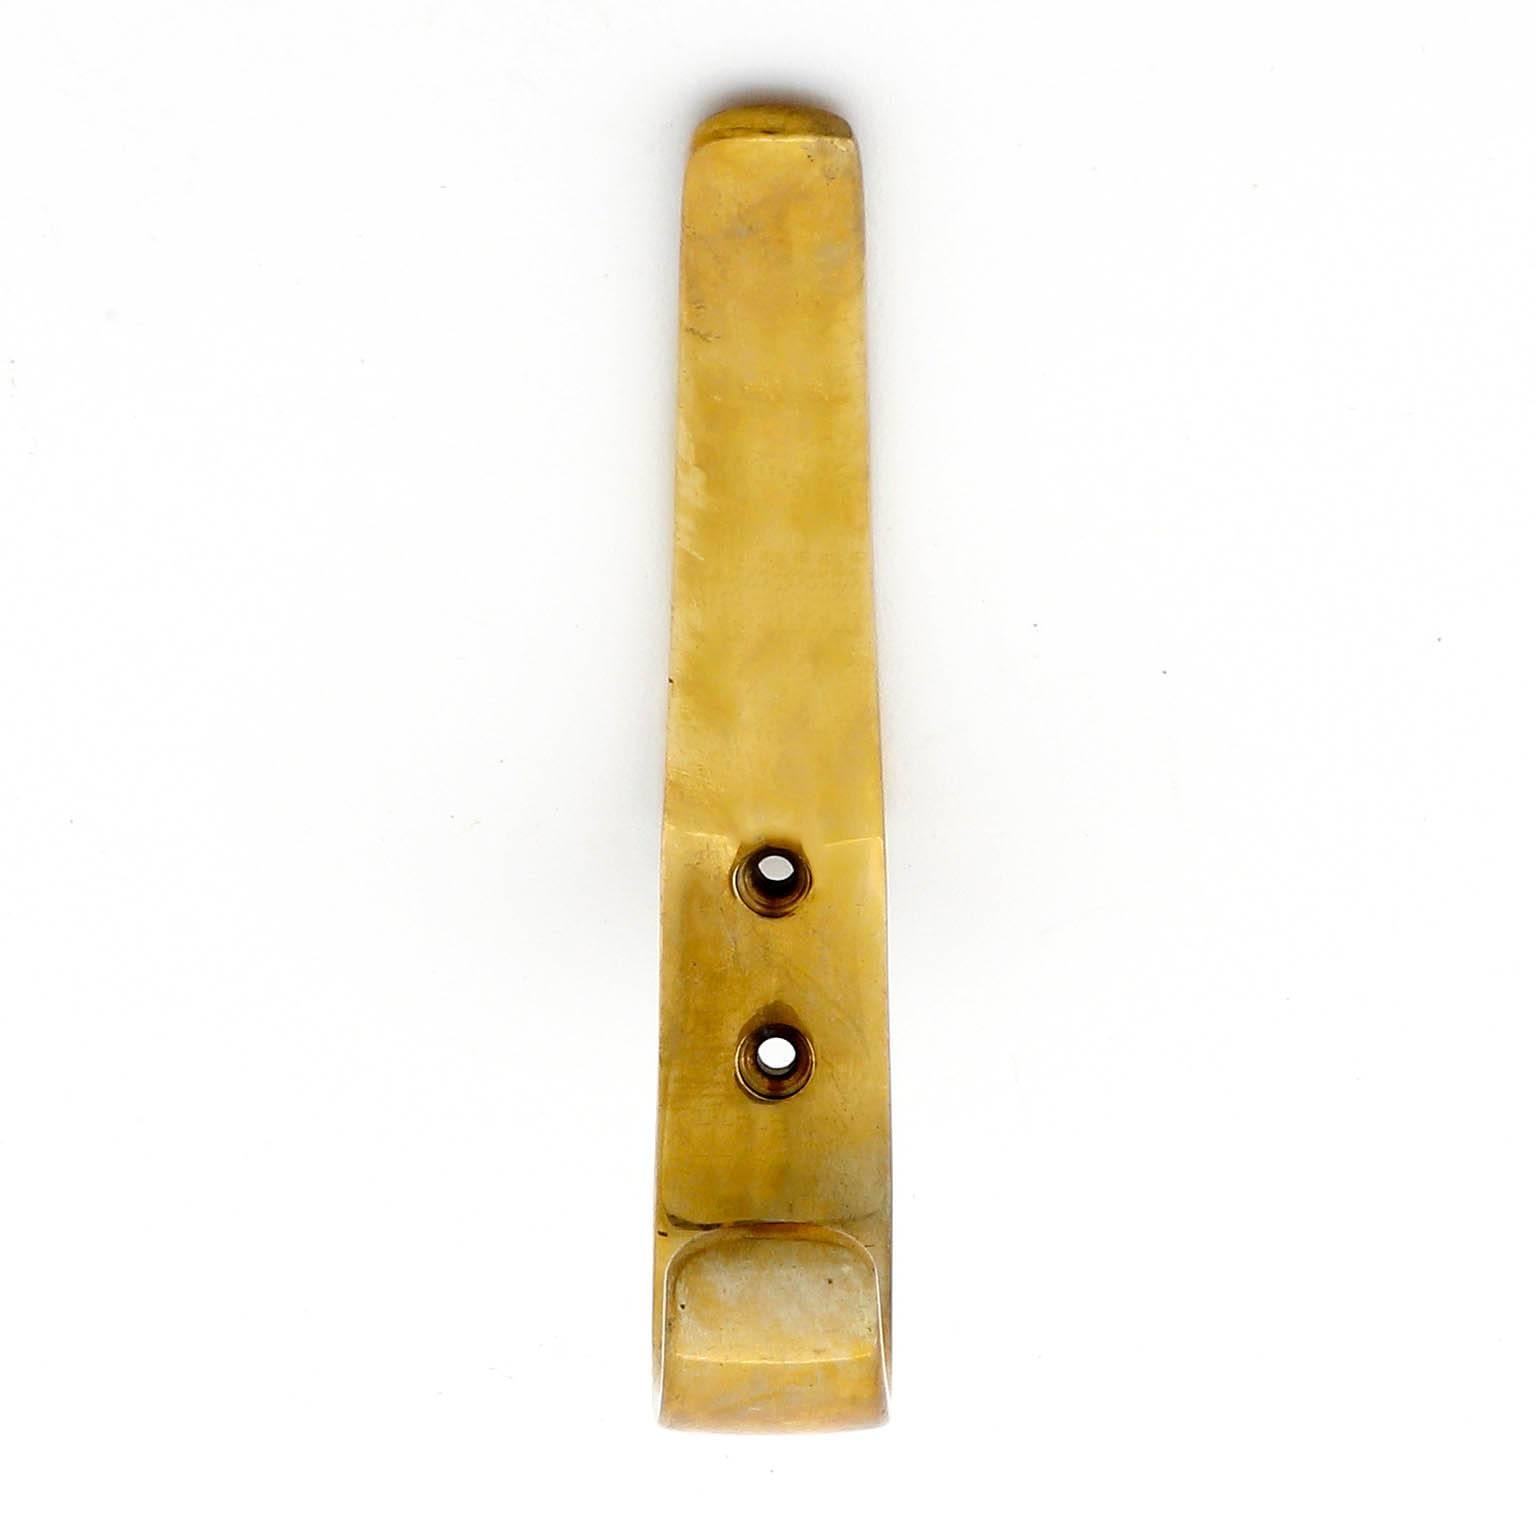 A set of five beautiful Austrian vintage coat wall hooks hooks by Hertha Baller, Vienna, 1950s. In the style of Carl Auböck. They are made of polished brass with little and lovely patina.

There are further hooks in the same style but in